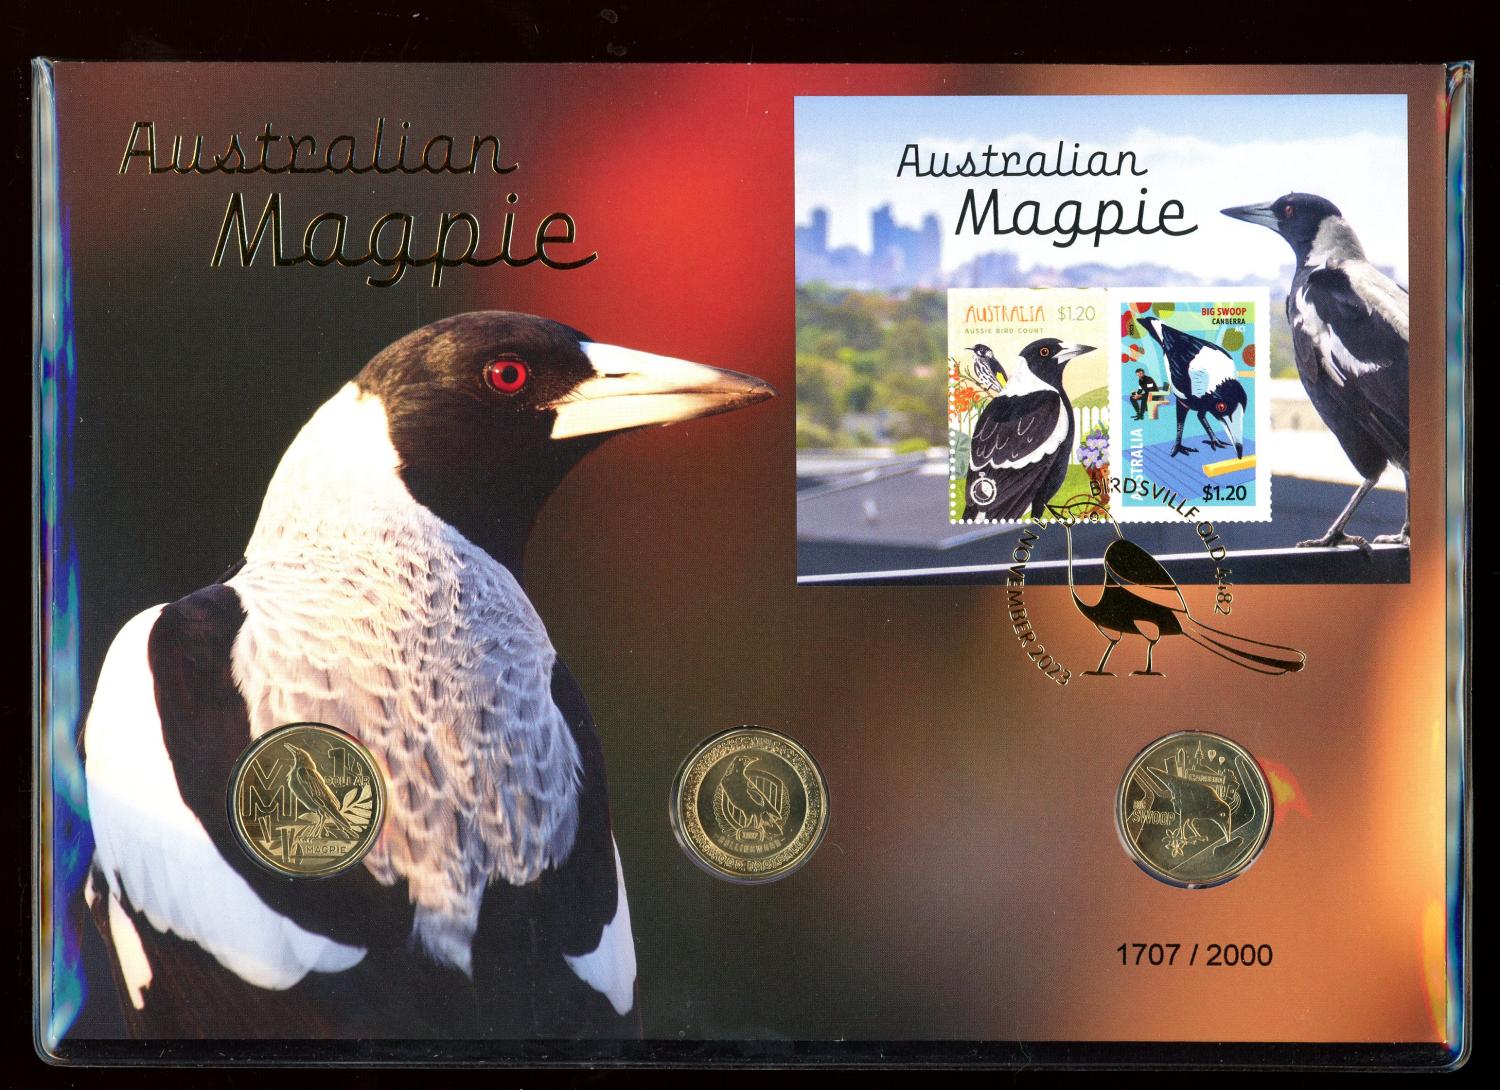 Thumbnail for 2023 Magpie Big Swoop and Magpies Limited 3 Coin PNC with Foil Overprint 1707-2000